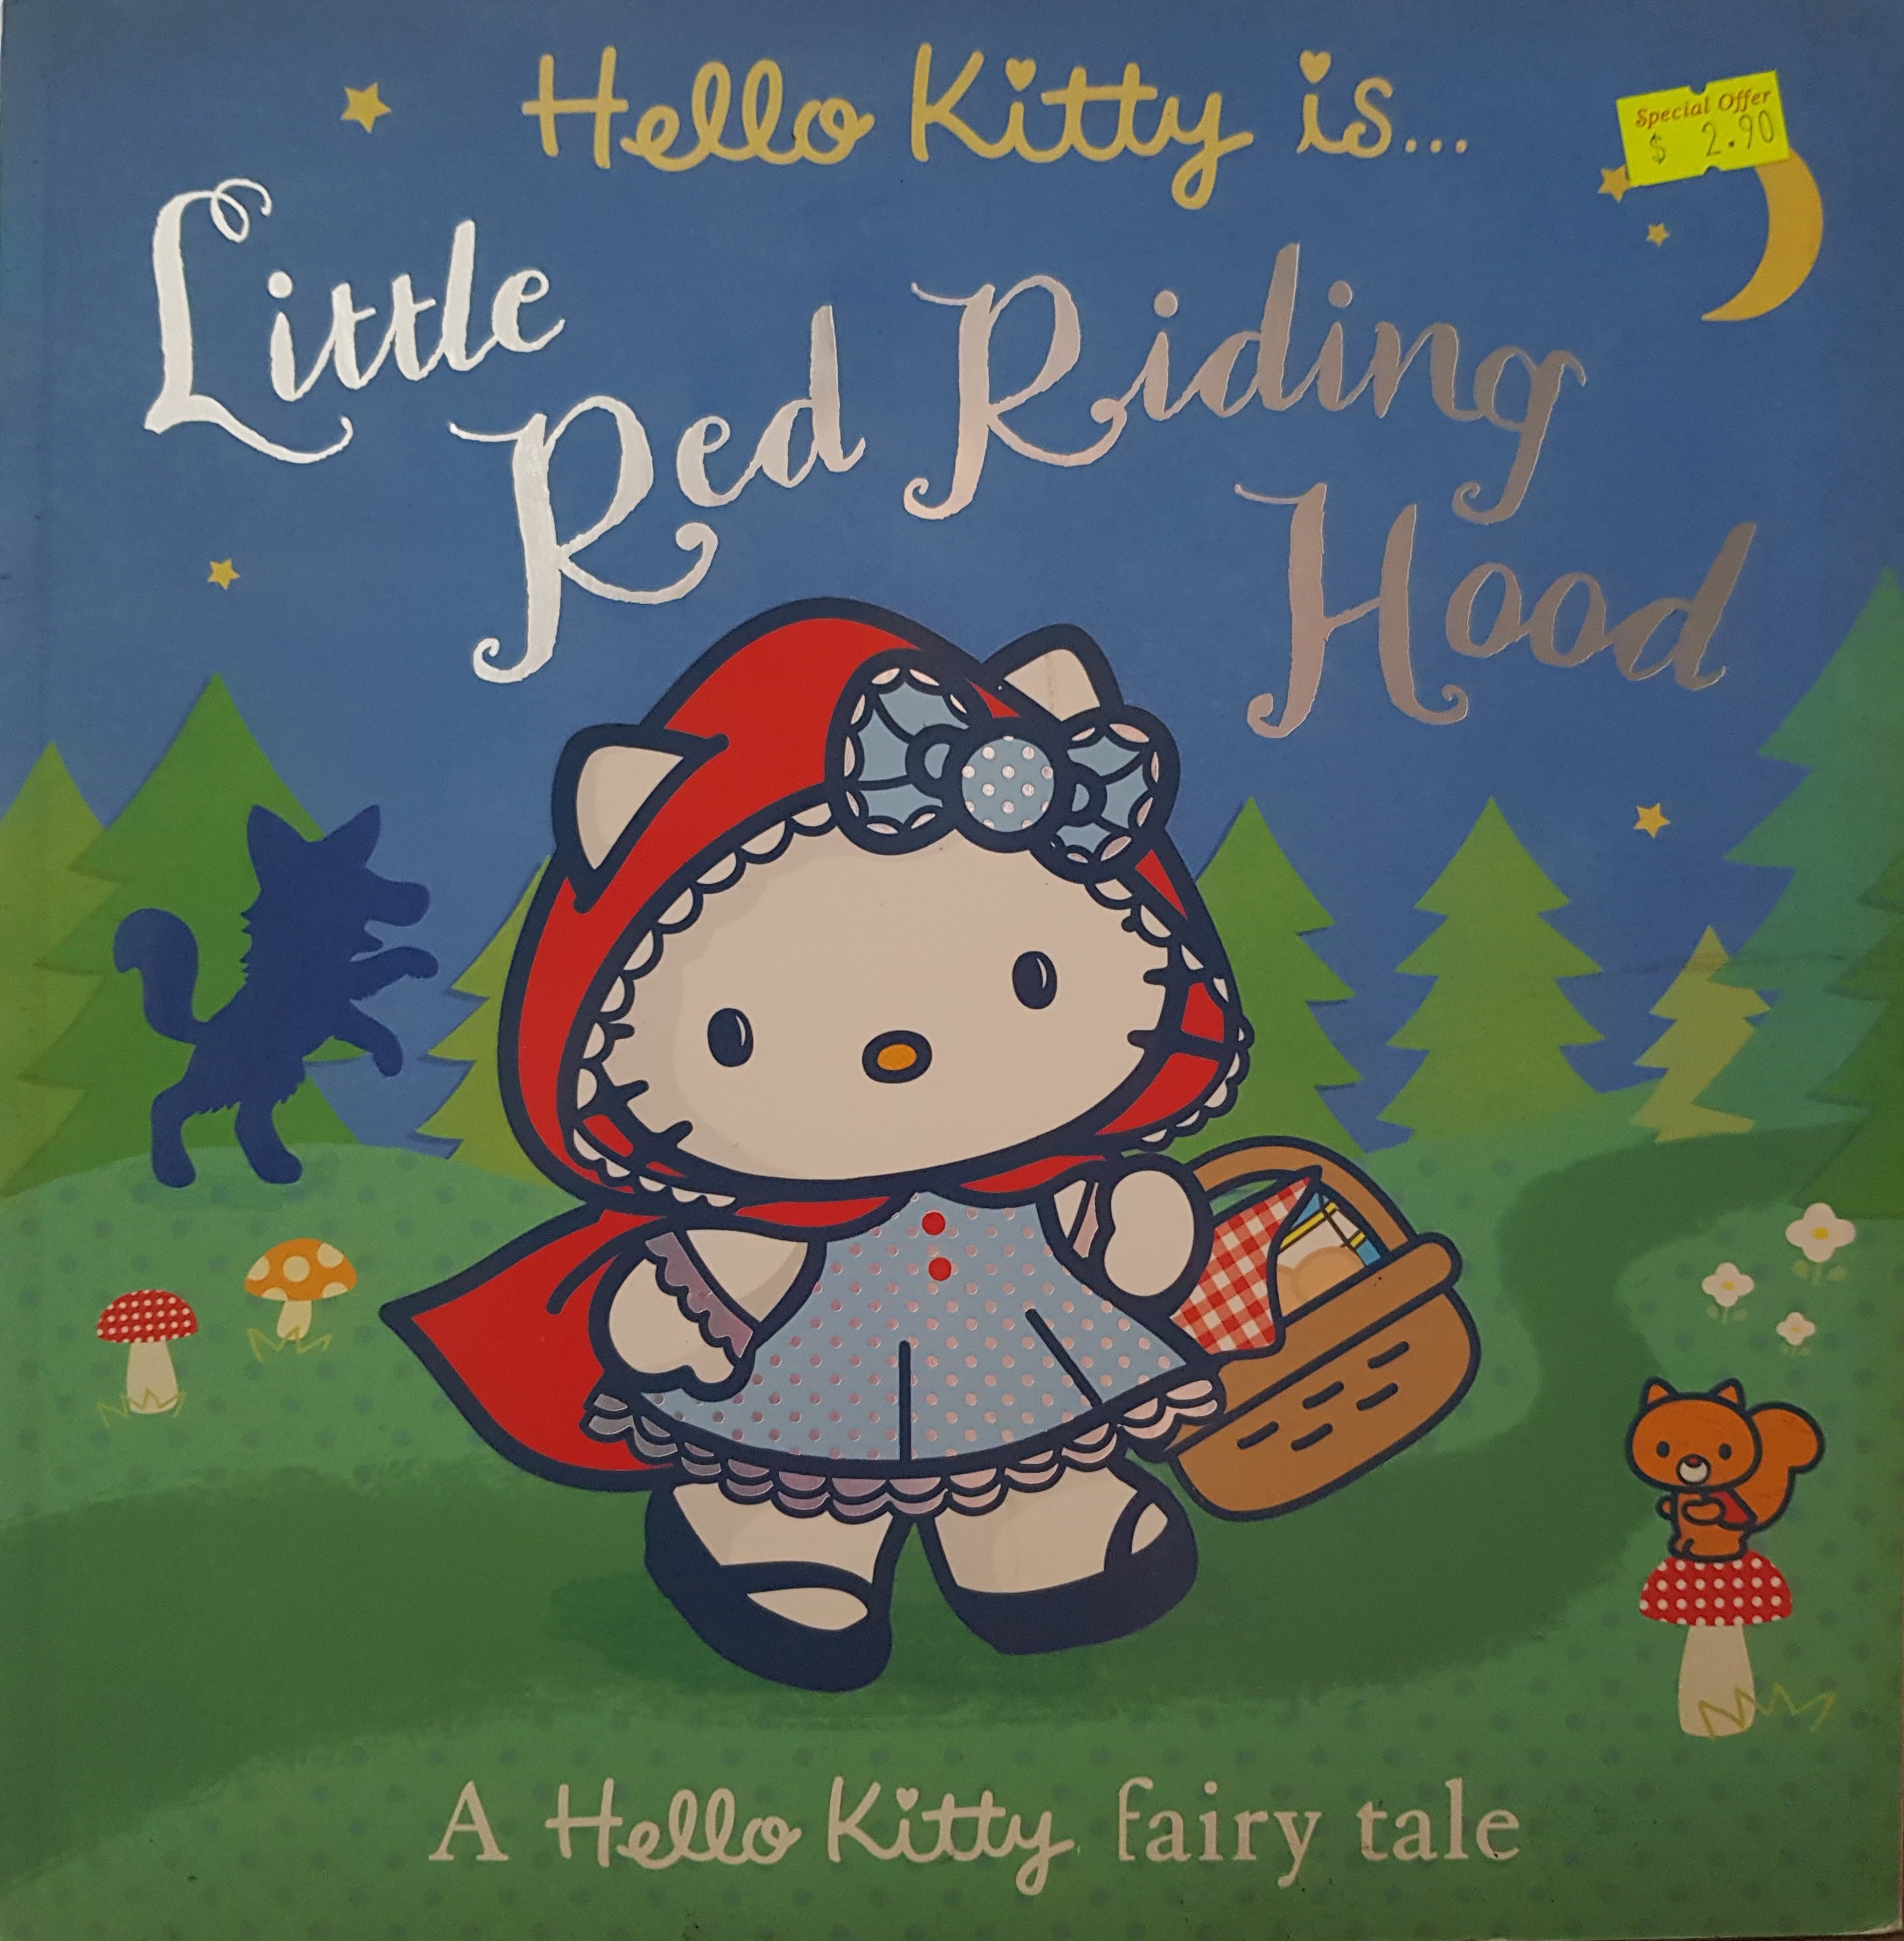 IMG : Little Red Riding Hood